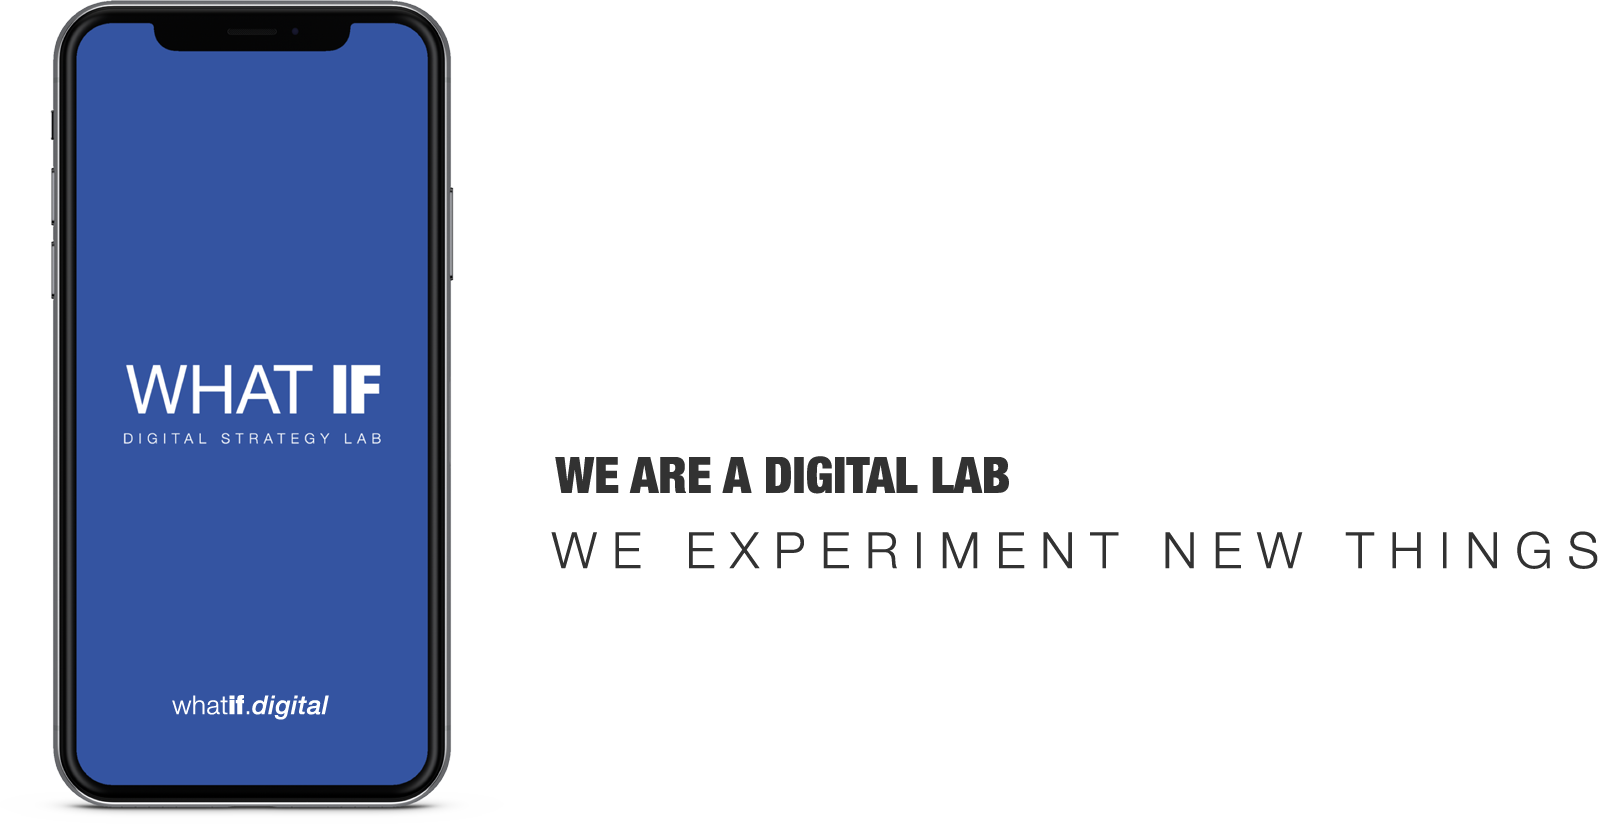 We are a digital lab. We do experiment new things.